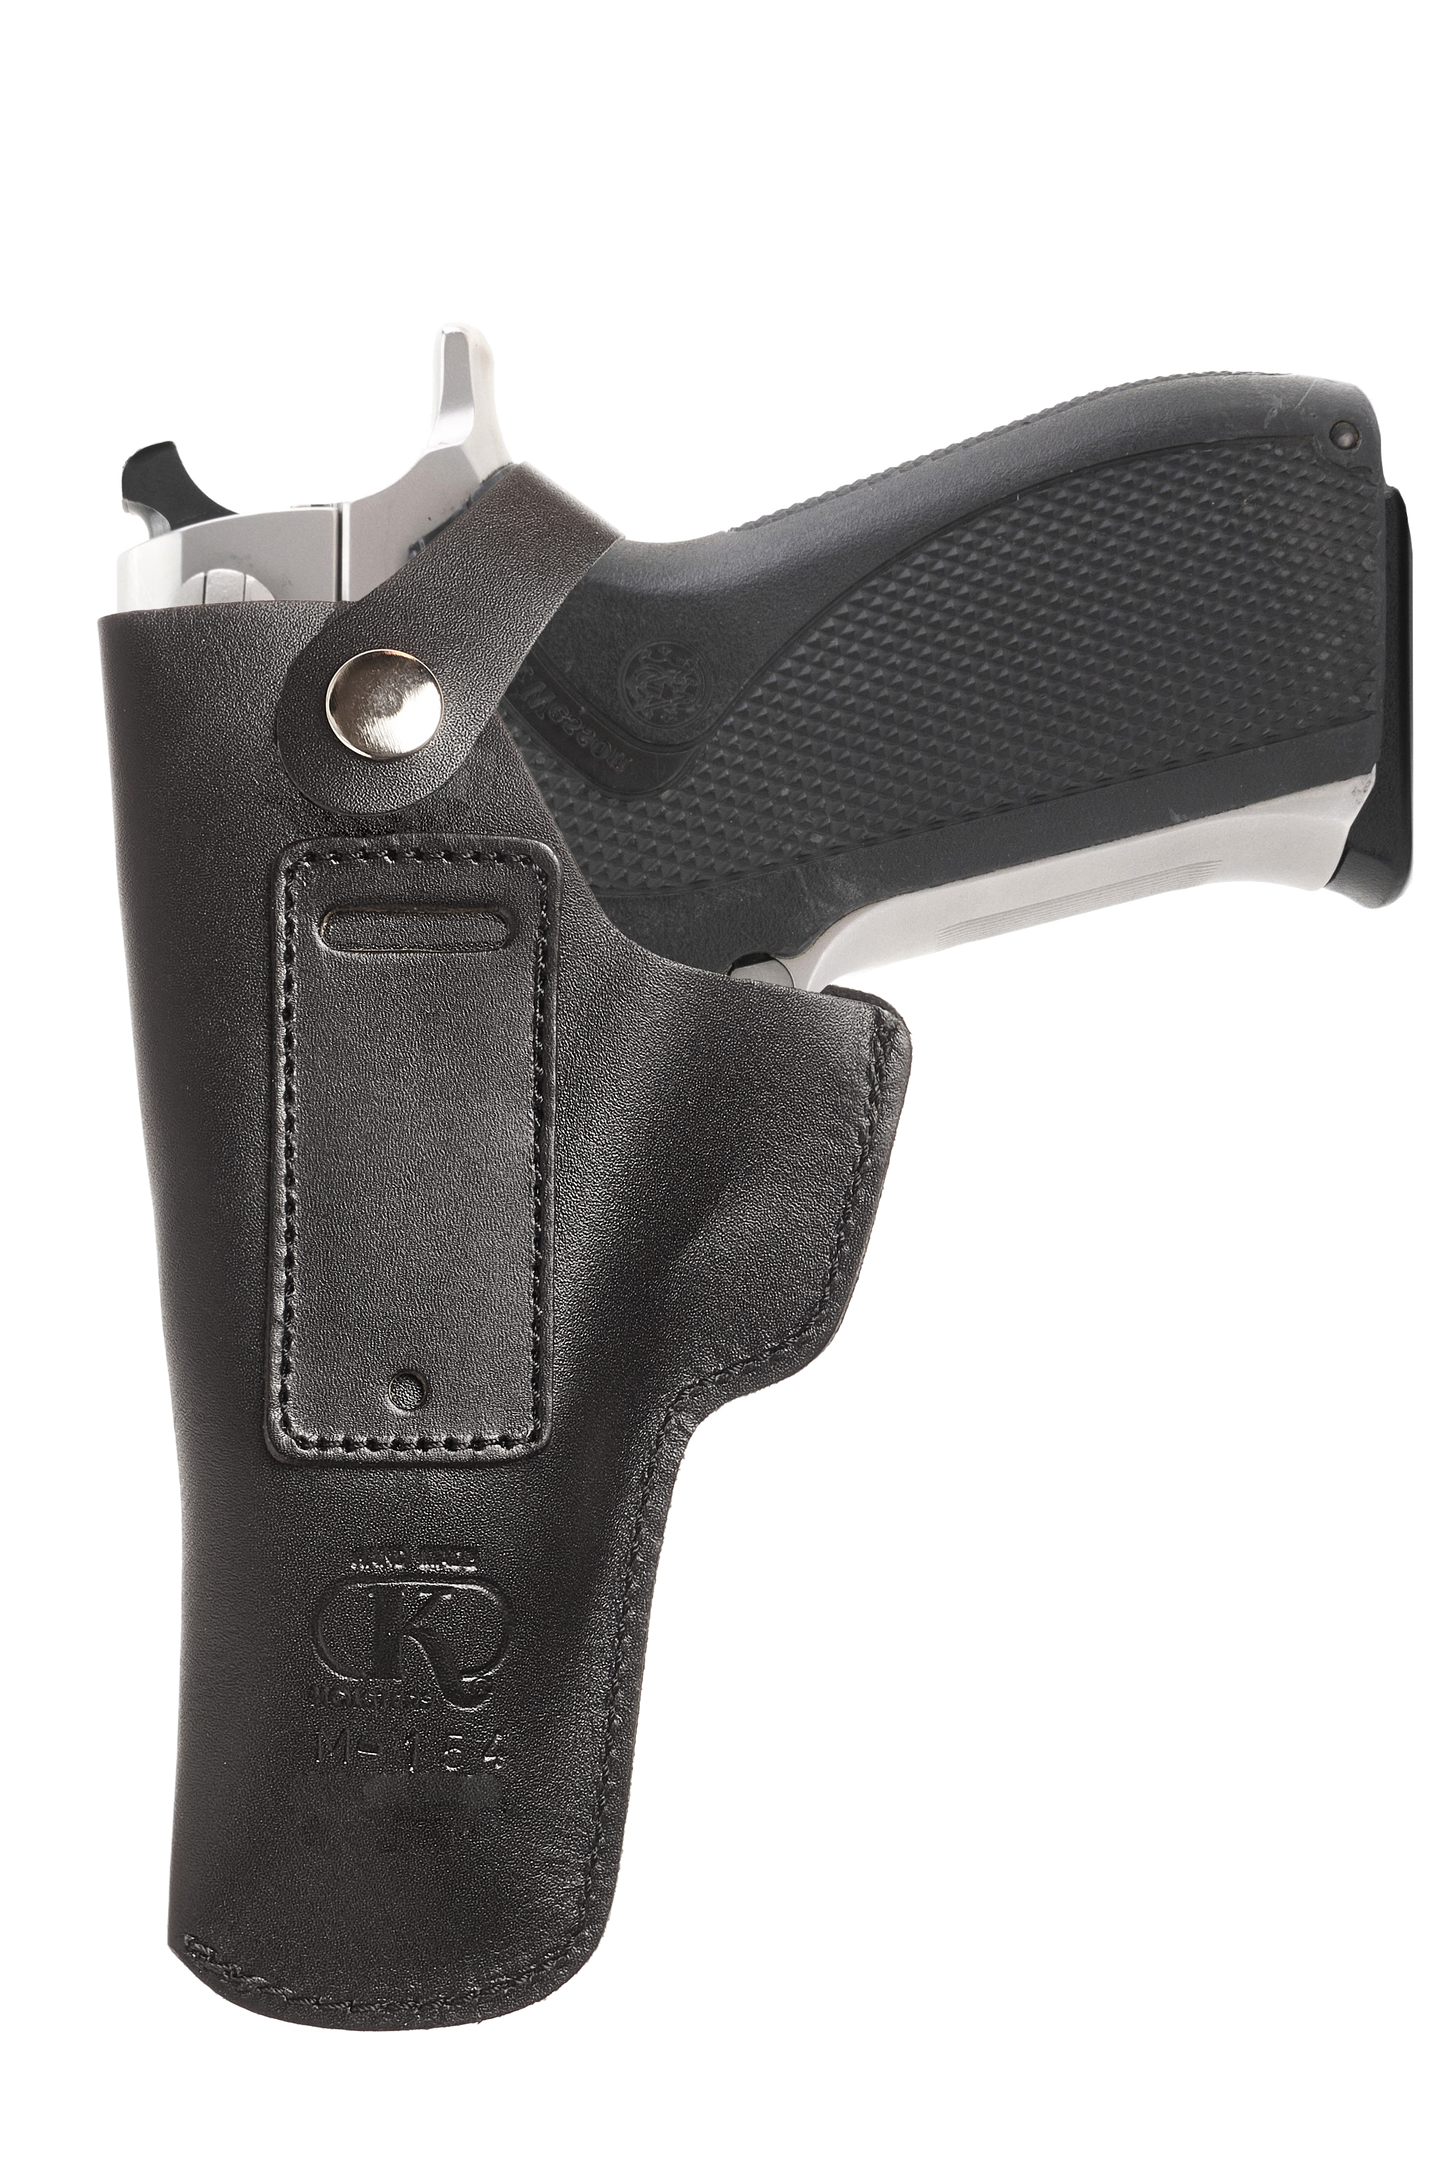 Smith&Wesson 5906 IWB Leather Holster with Belt Clip (KM154)